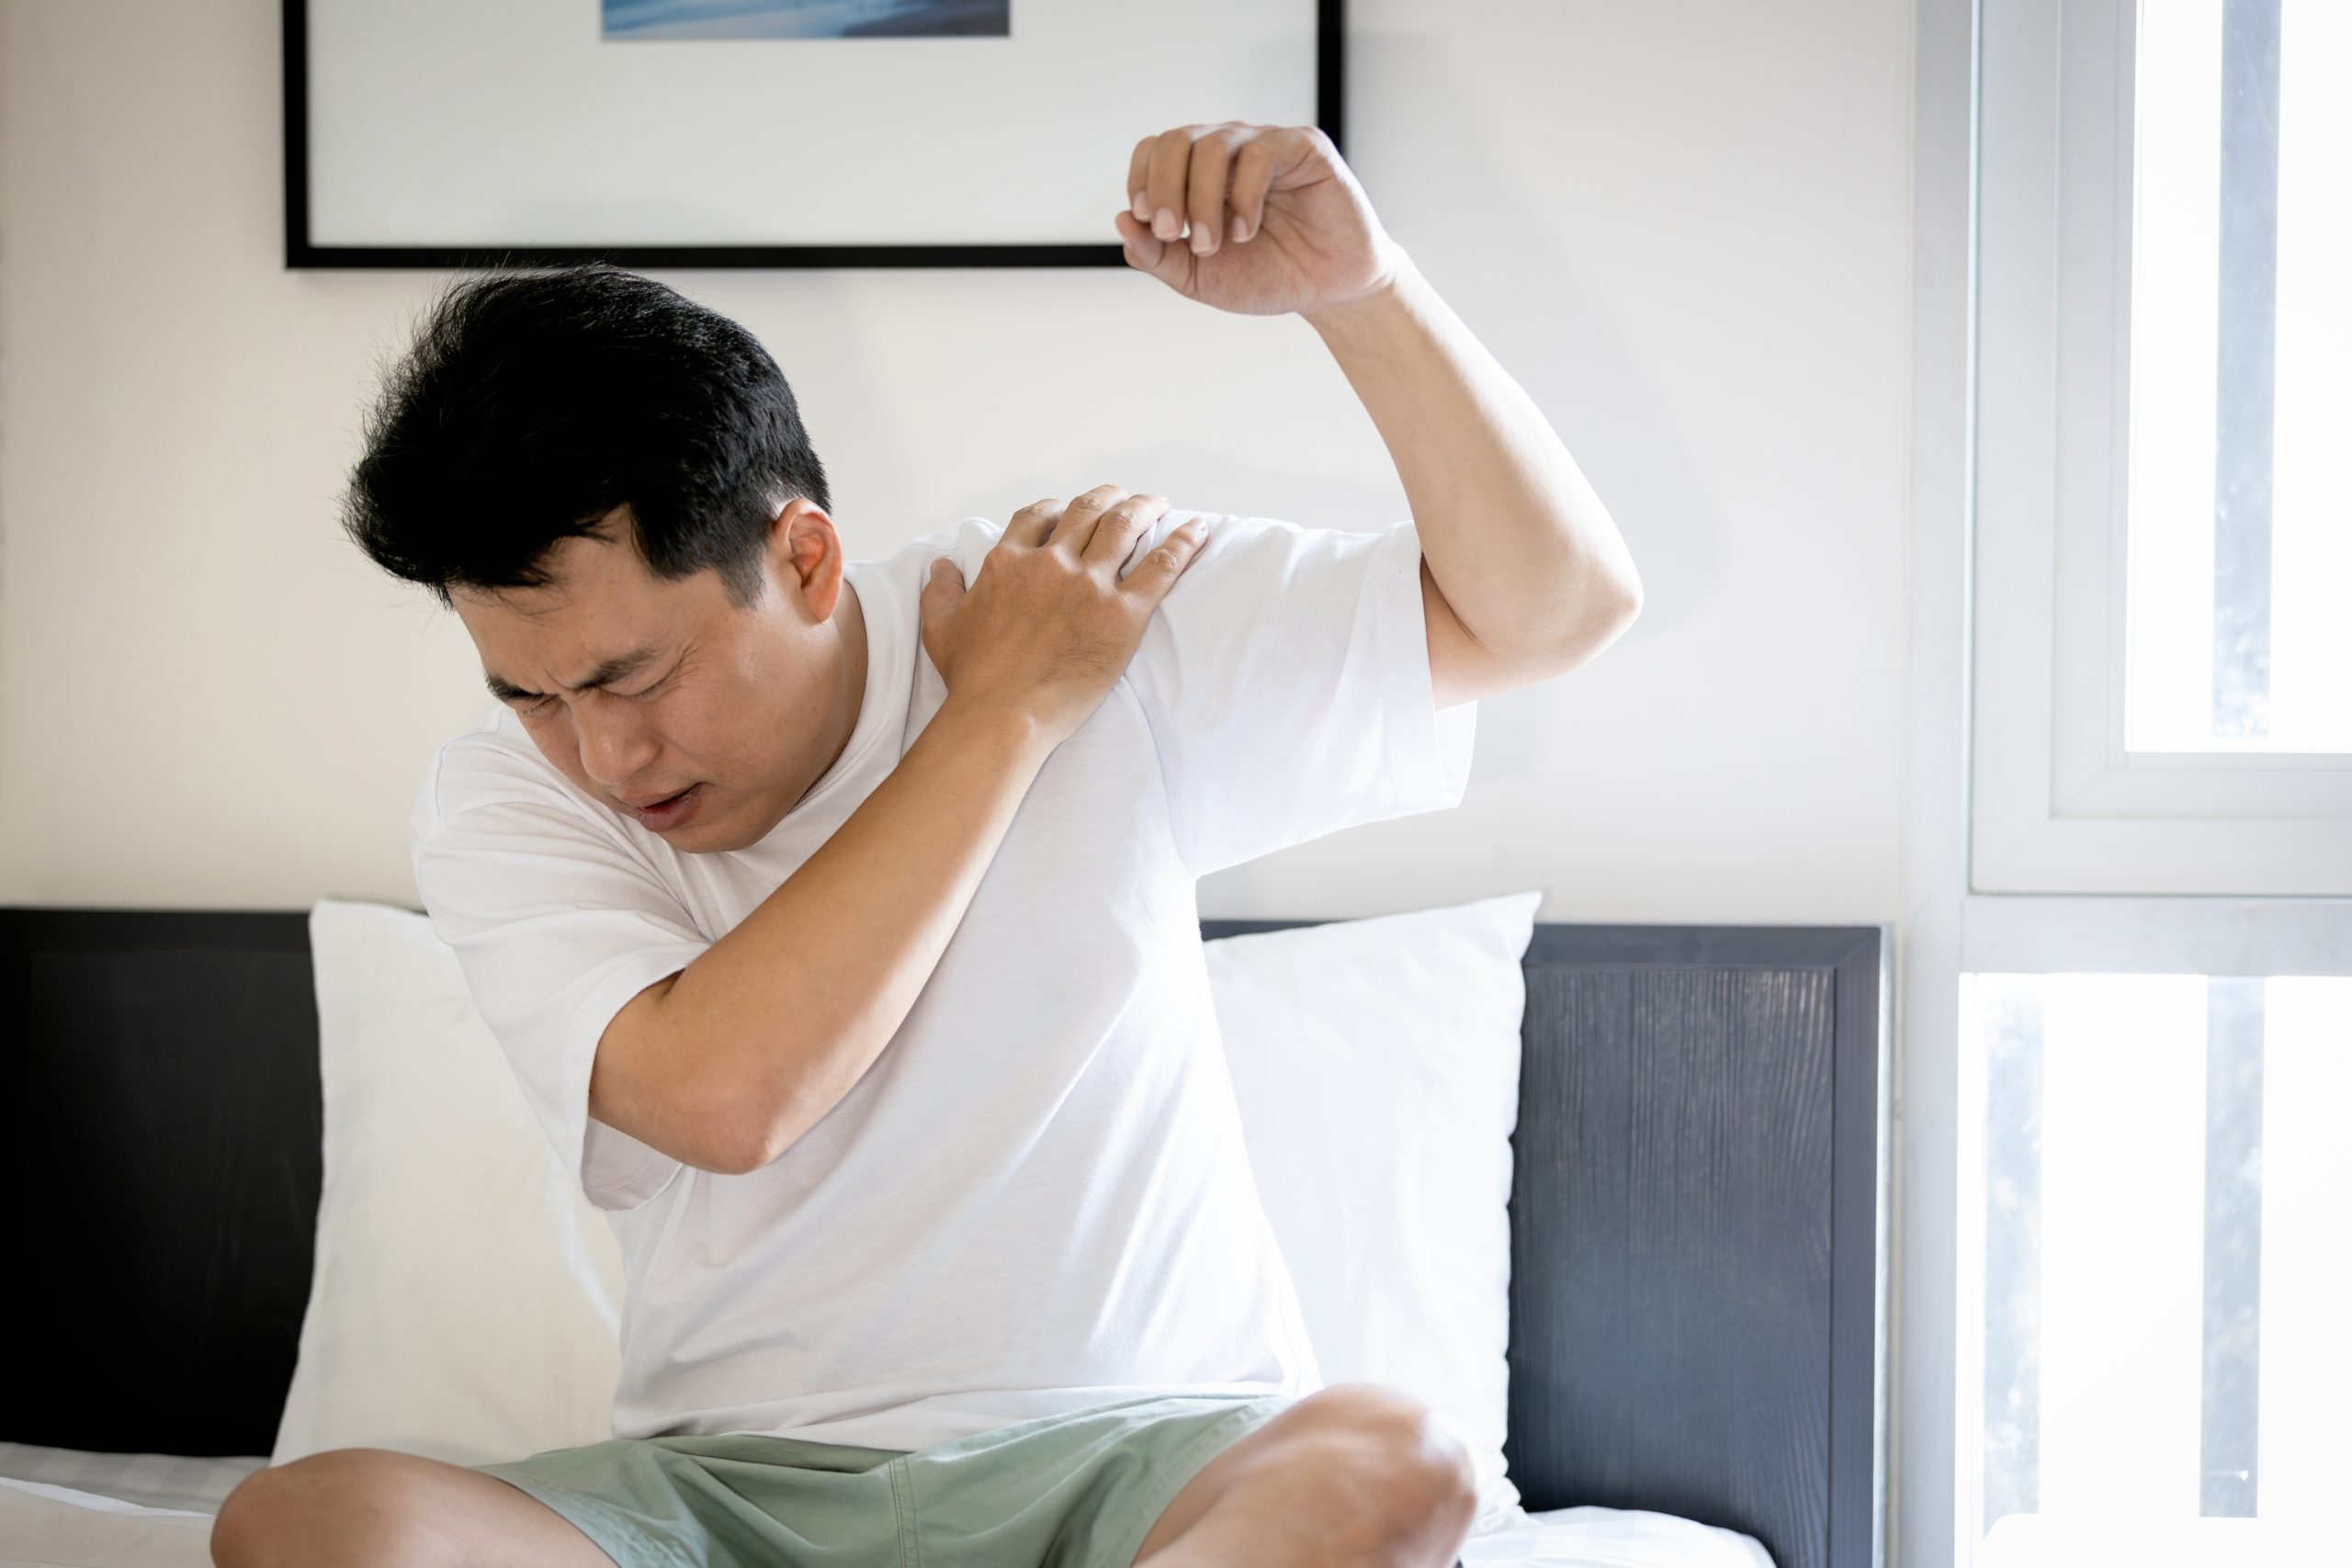 Chiropractic Care For Shoulder Pain Near Lake Stevens, WA